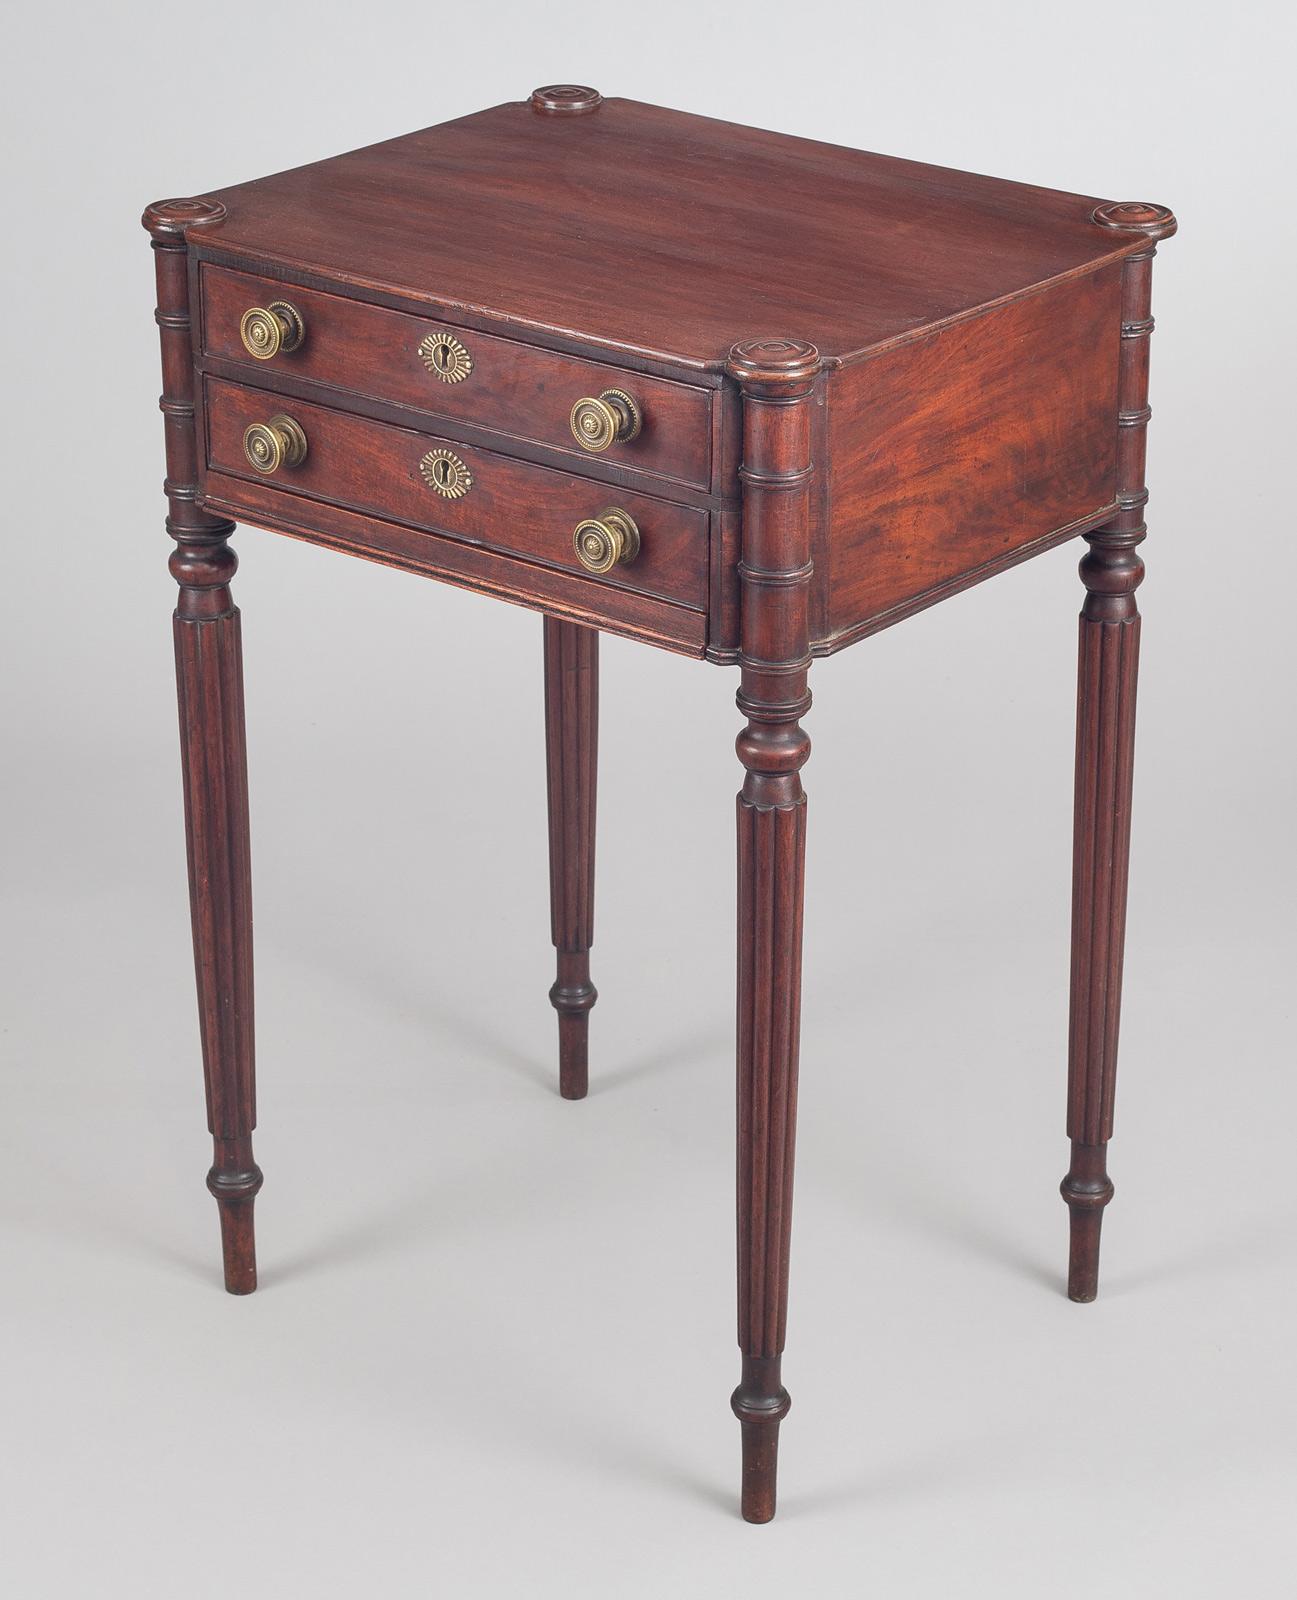 American, Federal, Sheraton mahogany work table, Salem, Massachusetts, with two cock-beaded drawers, the top drawer with compartments, ring turned turret corners, ending in finely reeded tapered legs. Paper label on the back reads: T.G.Buckley, 690